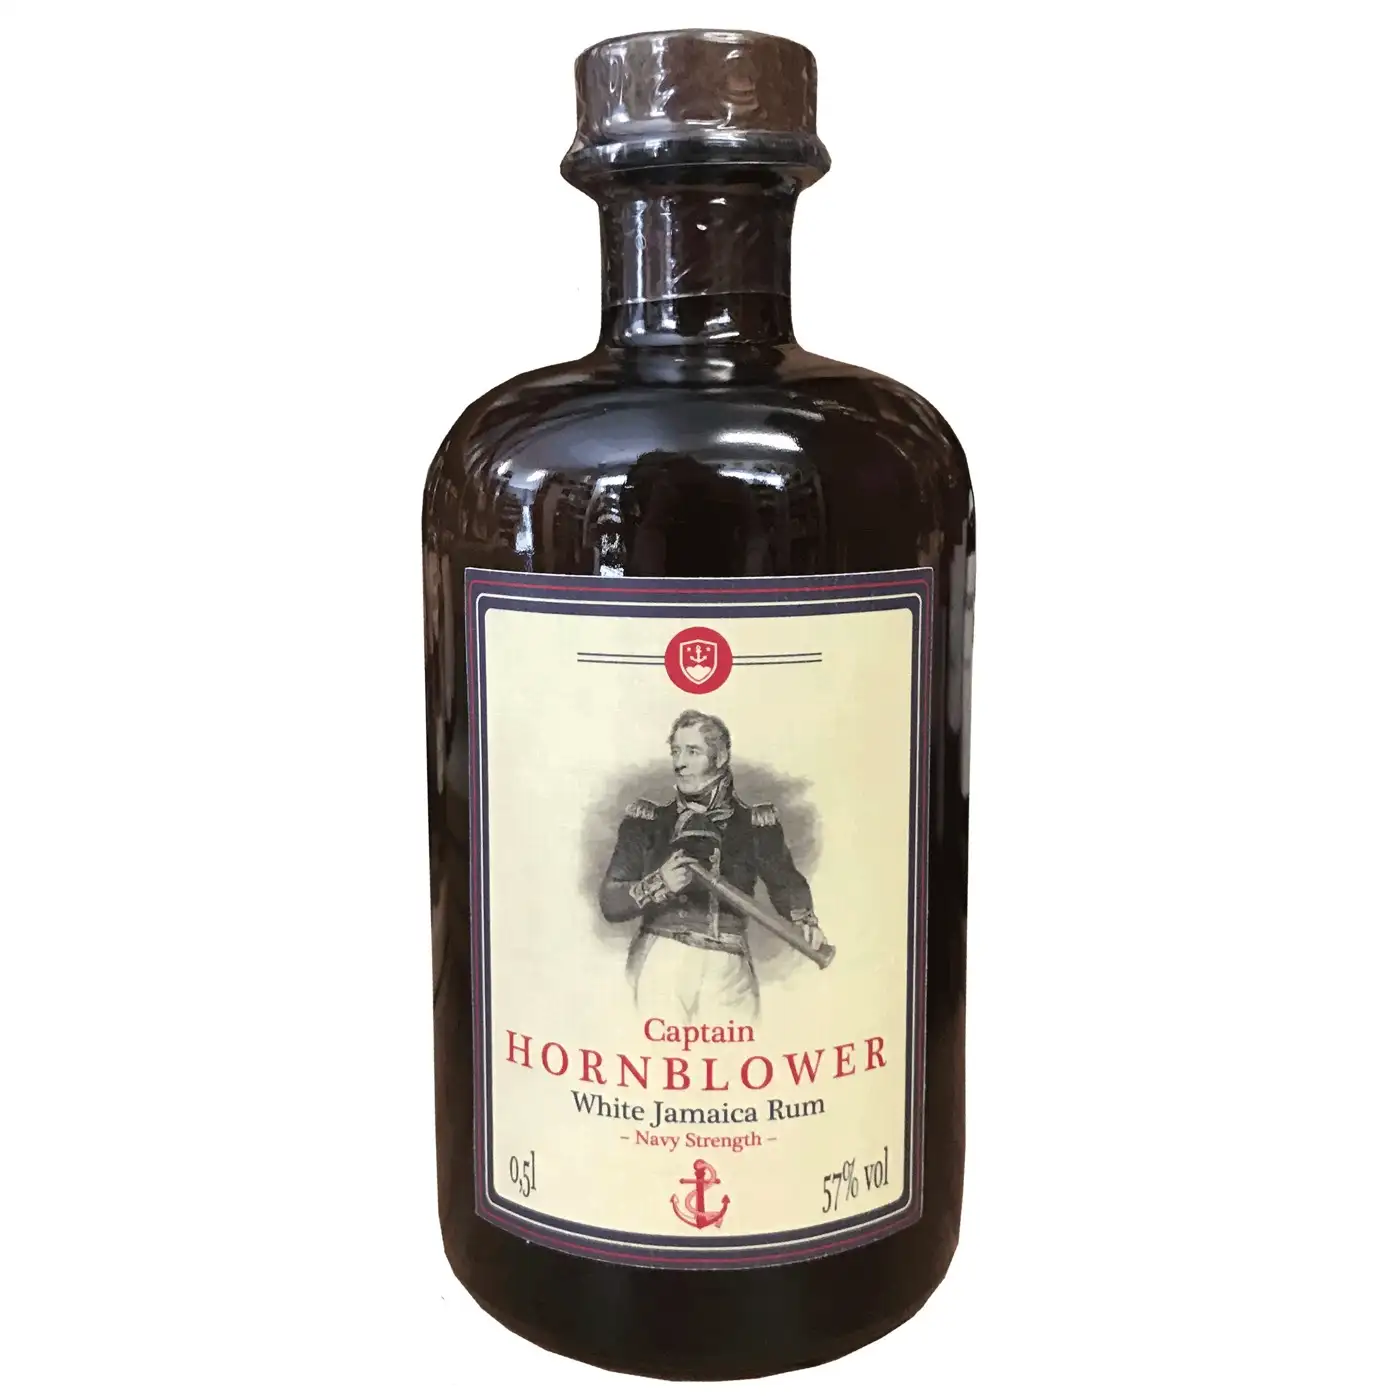 Image of the front of the bottle of the rum Captain Hornblower White Jamaica Rum